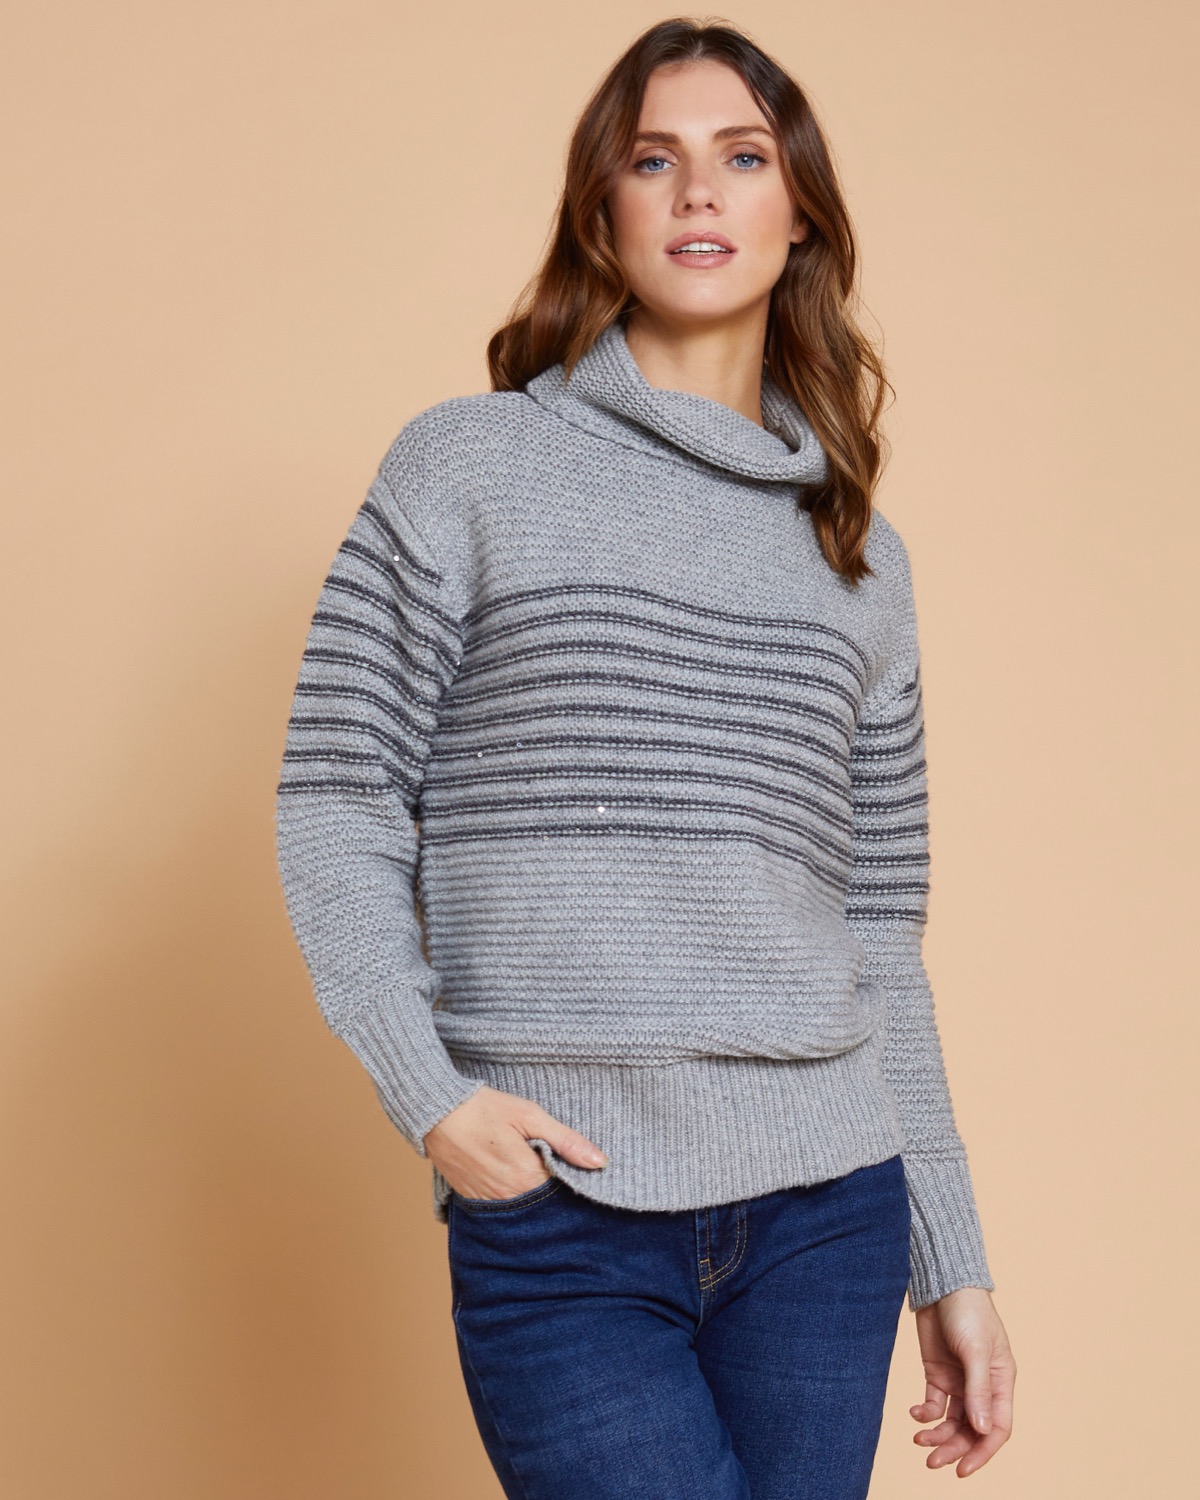 https://dunnes.btxmedia.com/pws/client/images/catalogue/products/3615526/zoom/3615526_grey.jpg